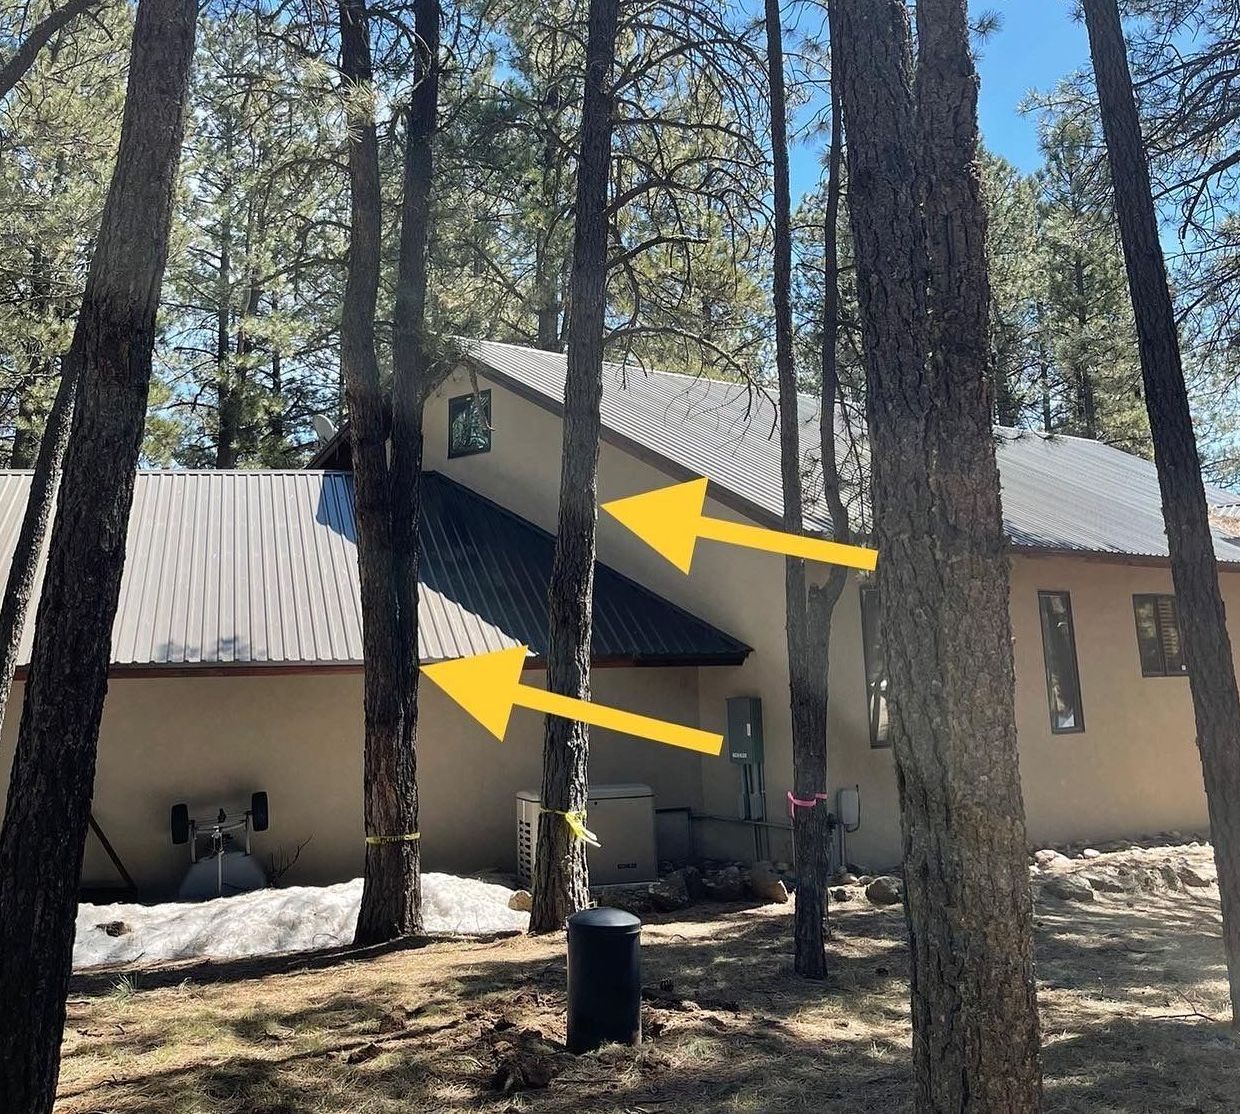 Before Taos Tree removed several trees from in front of a large territorial style stucco home in a forested area.